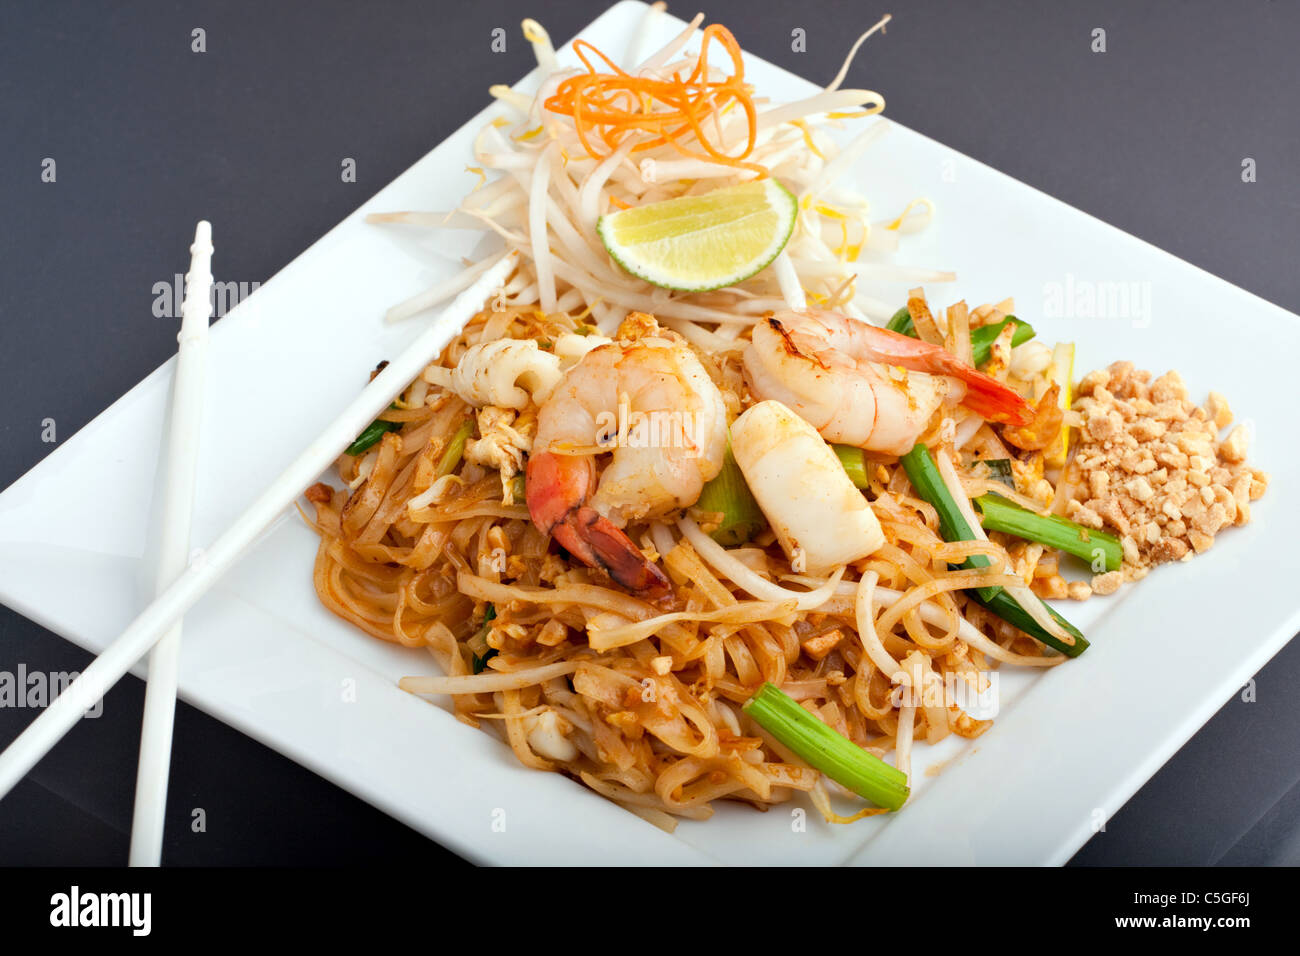 Seafood pad Thai dish of Thai fried rice noodles on a square white plate with chopsticks and grated carrot garnish. Stock Photo